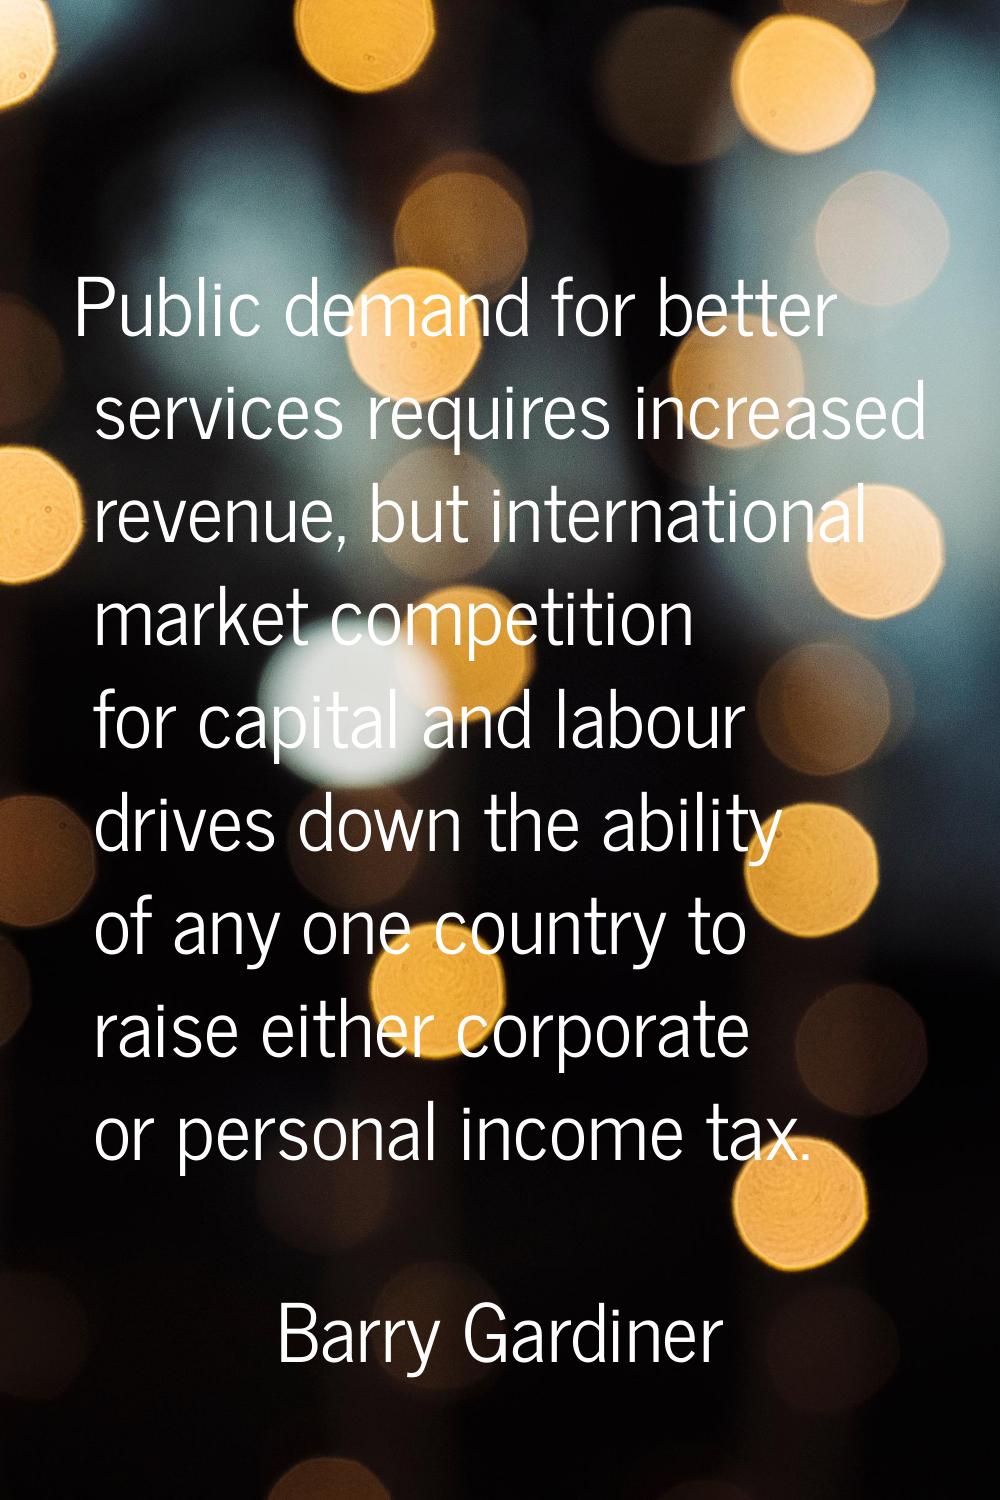 Public demand for better services requires increased revenue, but international market competition 